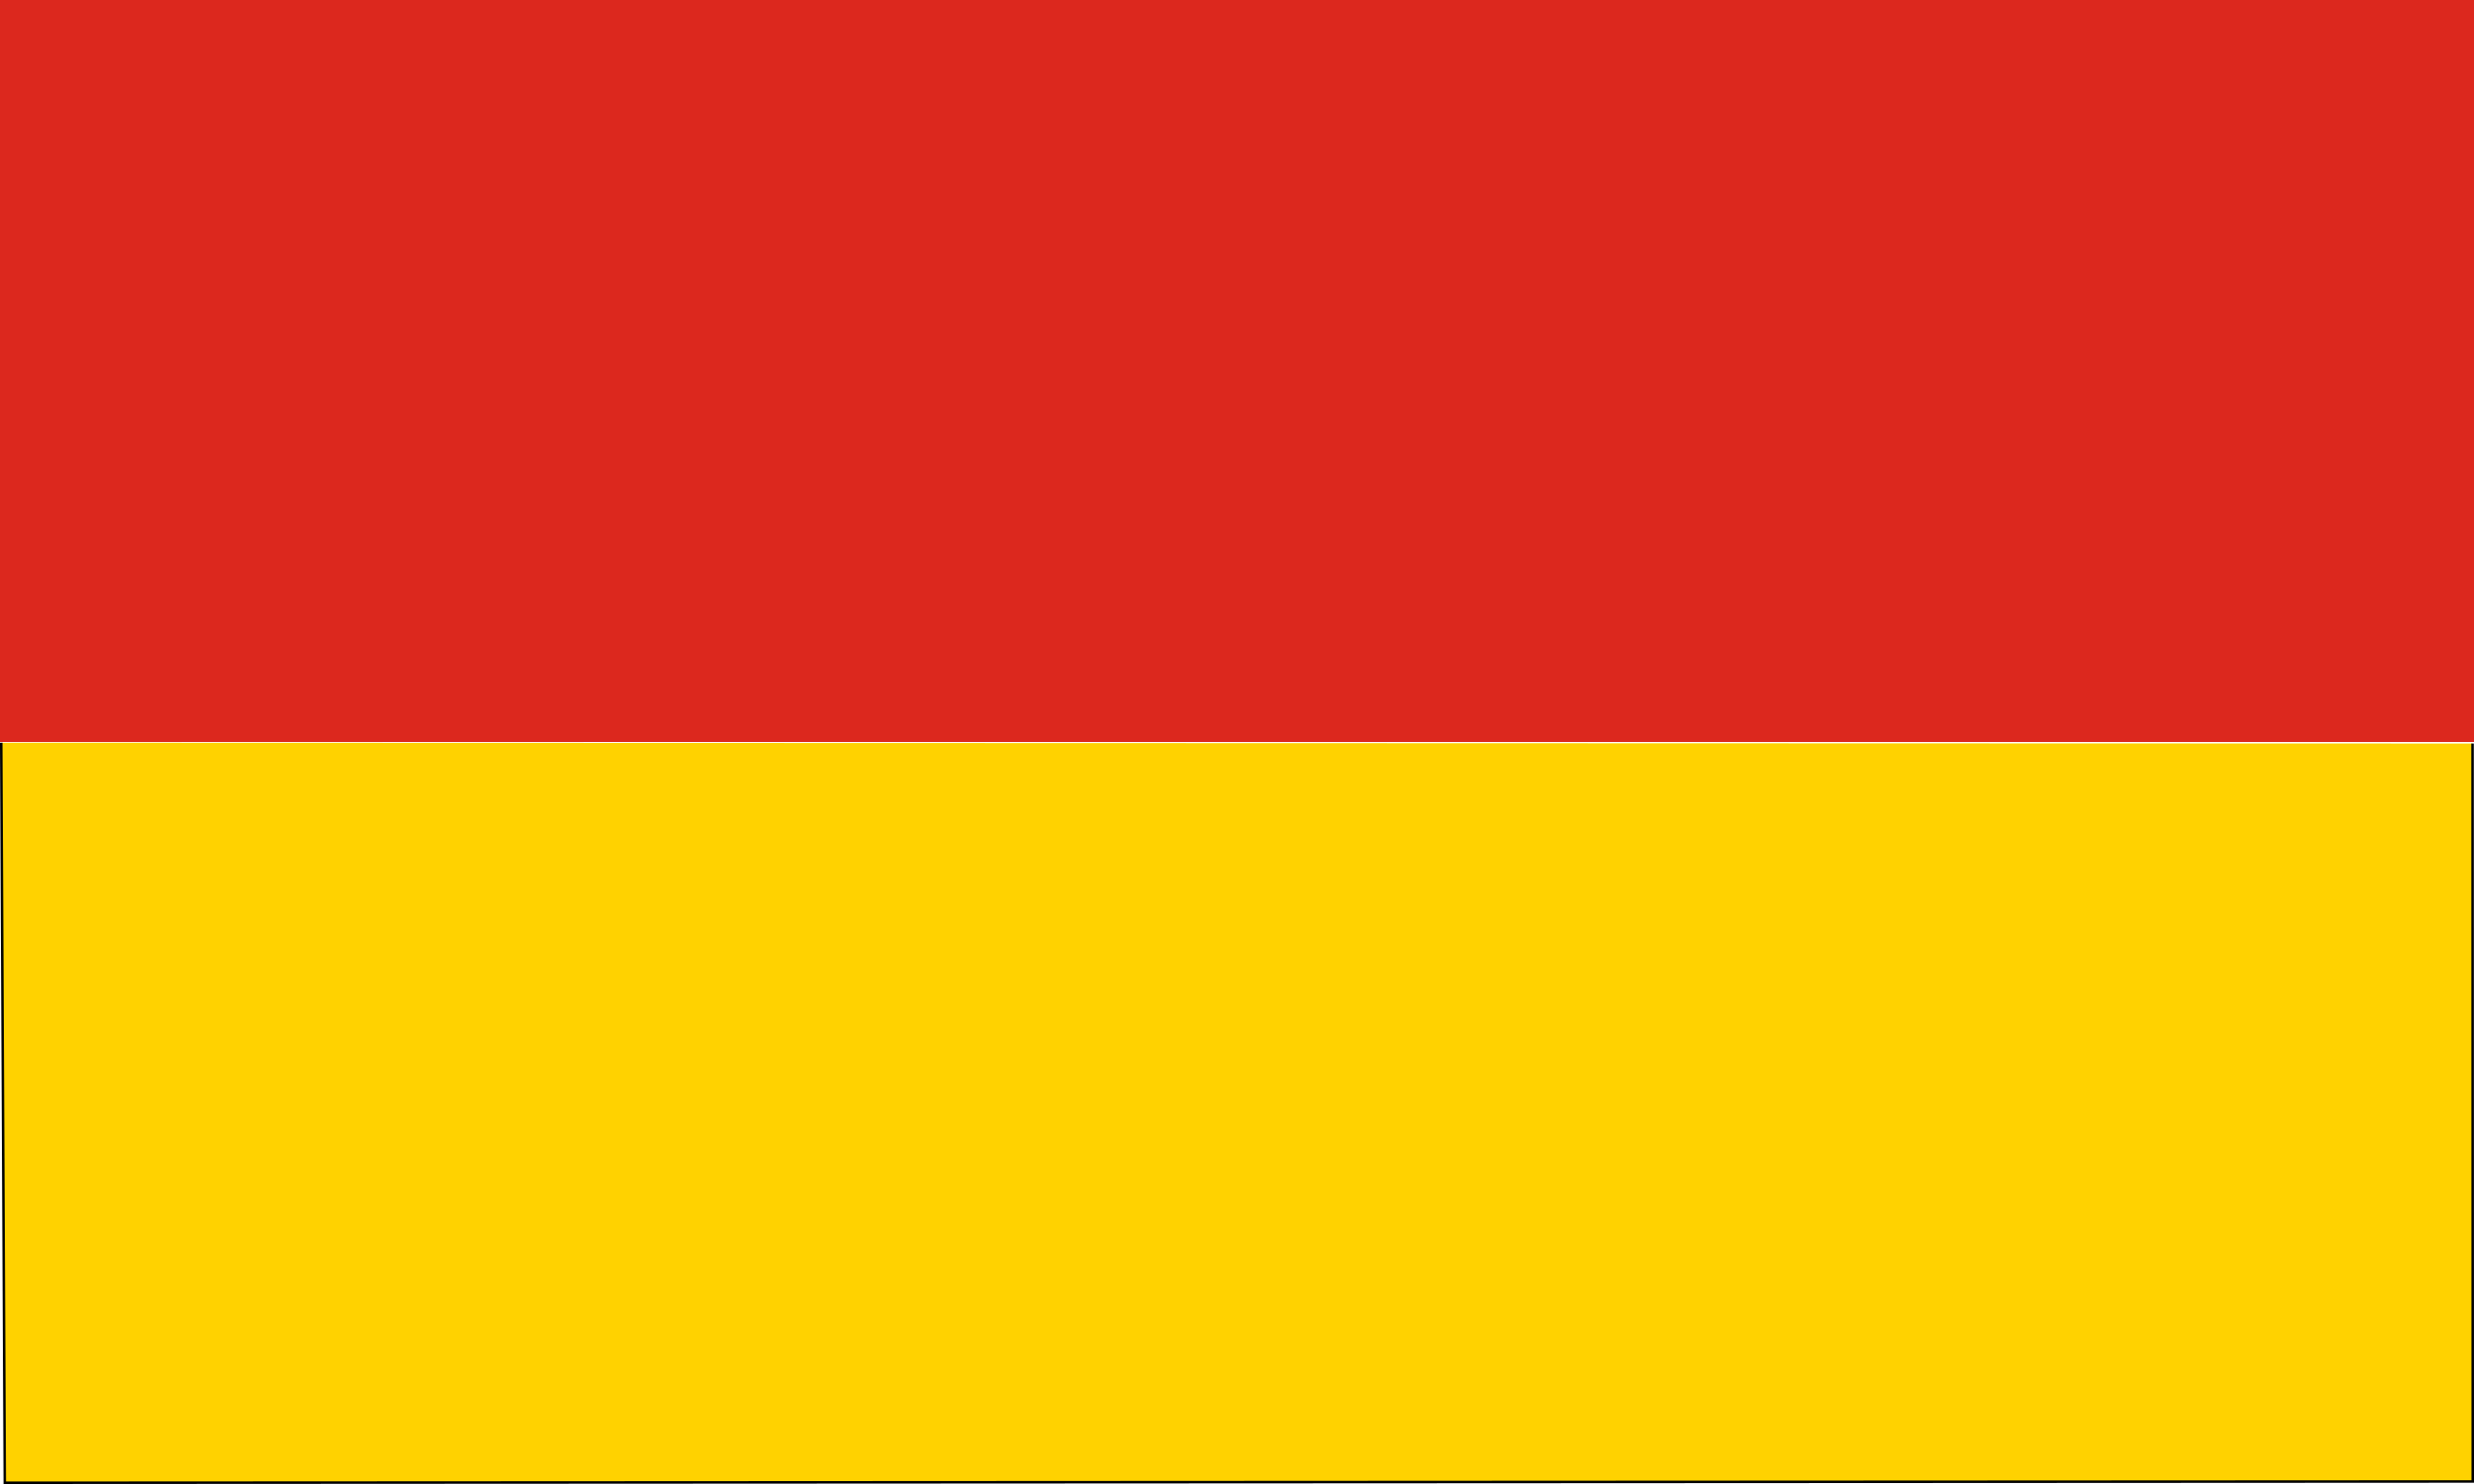 File:Flag red yellow.svg Wikimedia Commons